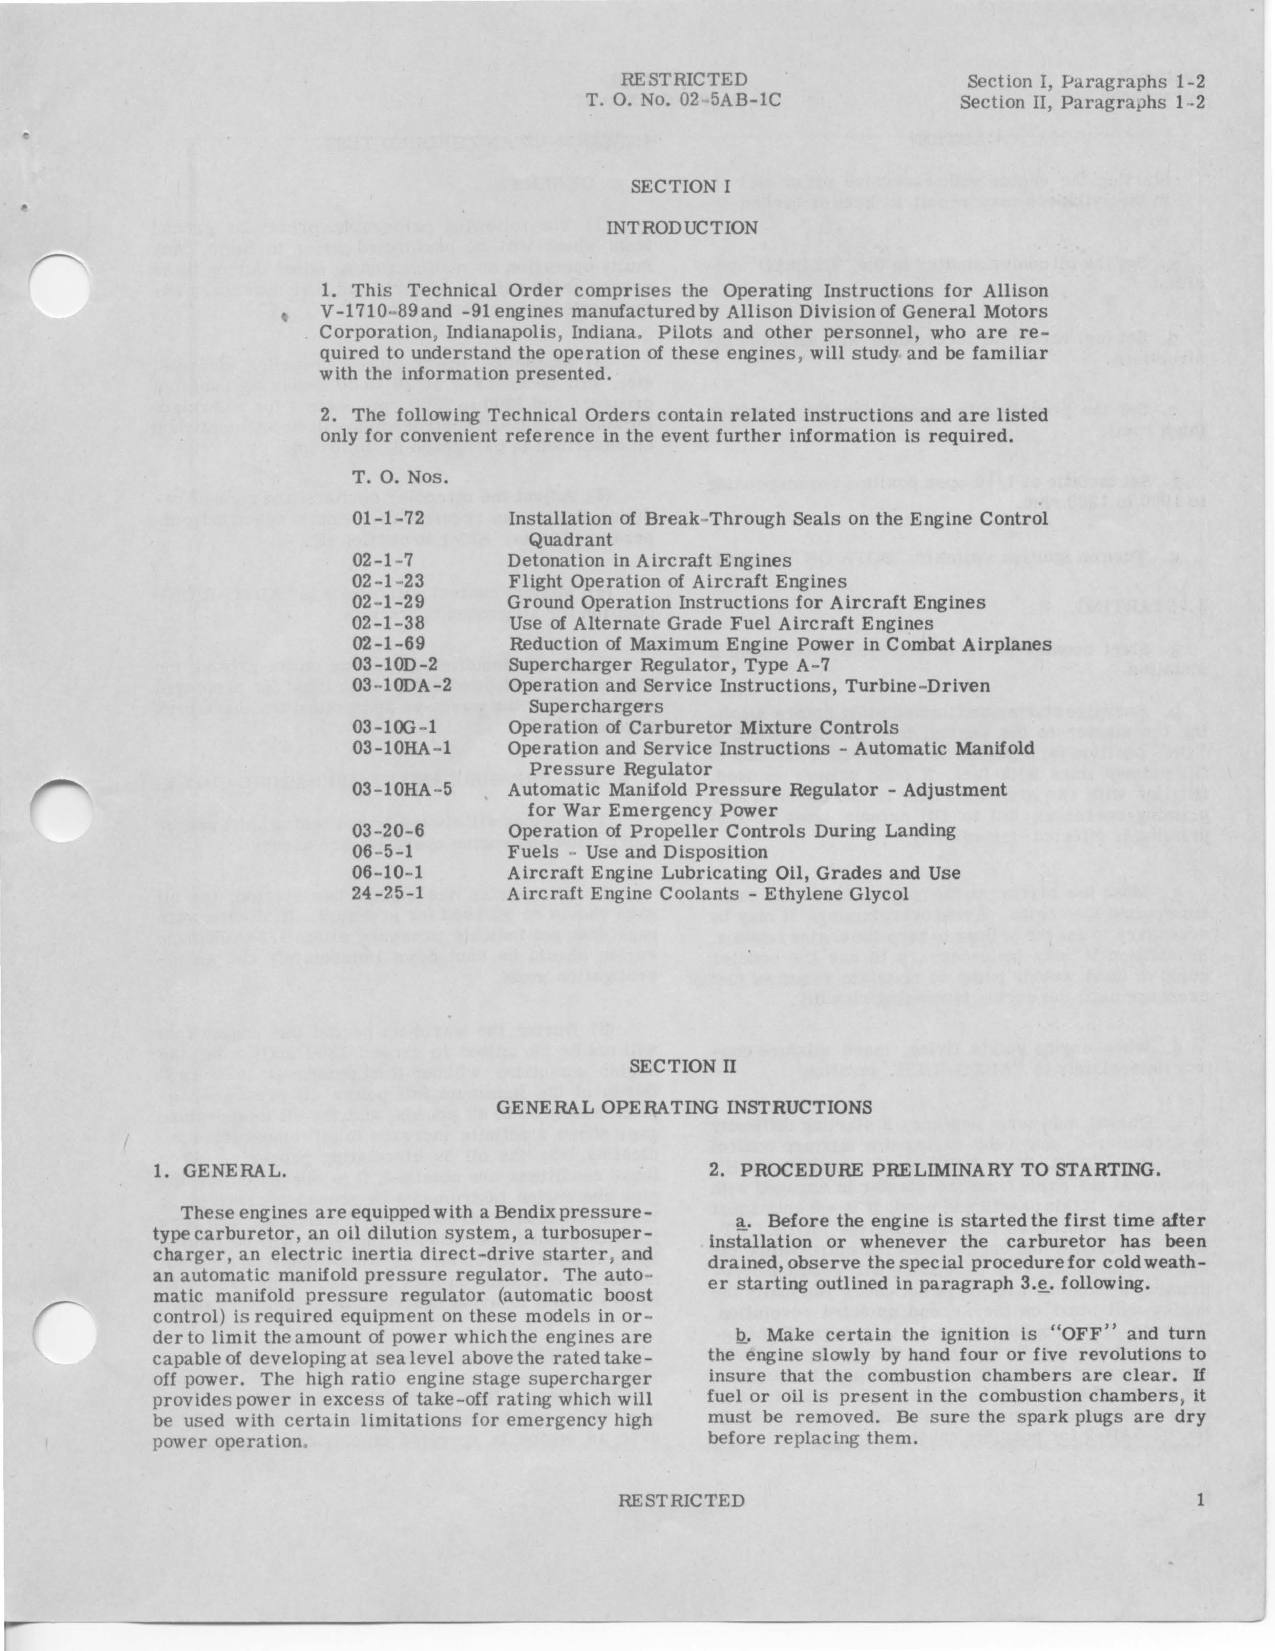 Sample page 5 from AirCorps Library document: Overhaul Instructions for V-1710-89 and V-1710-91 Engines